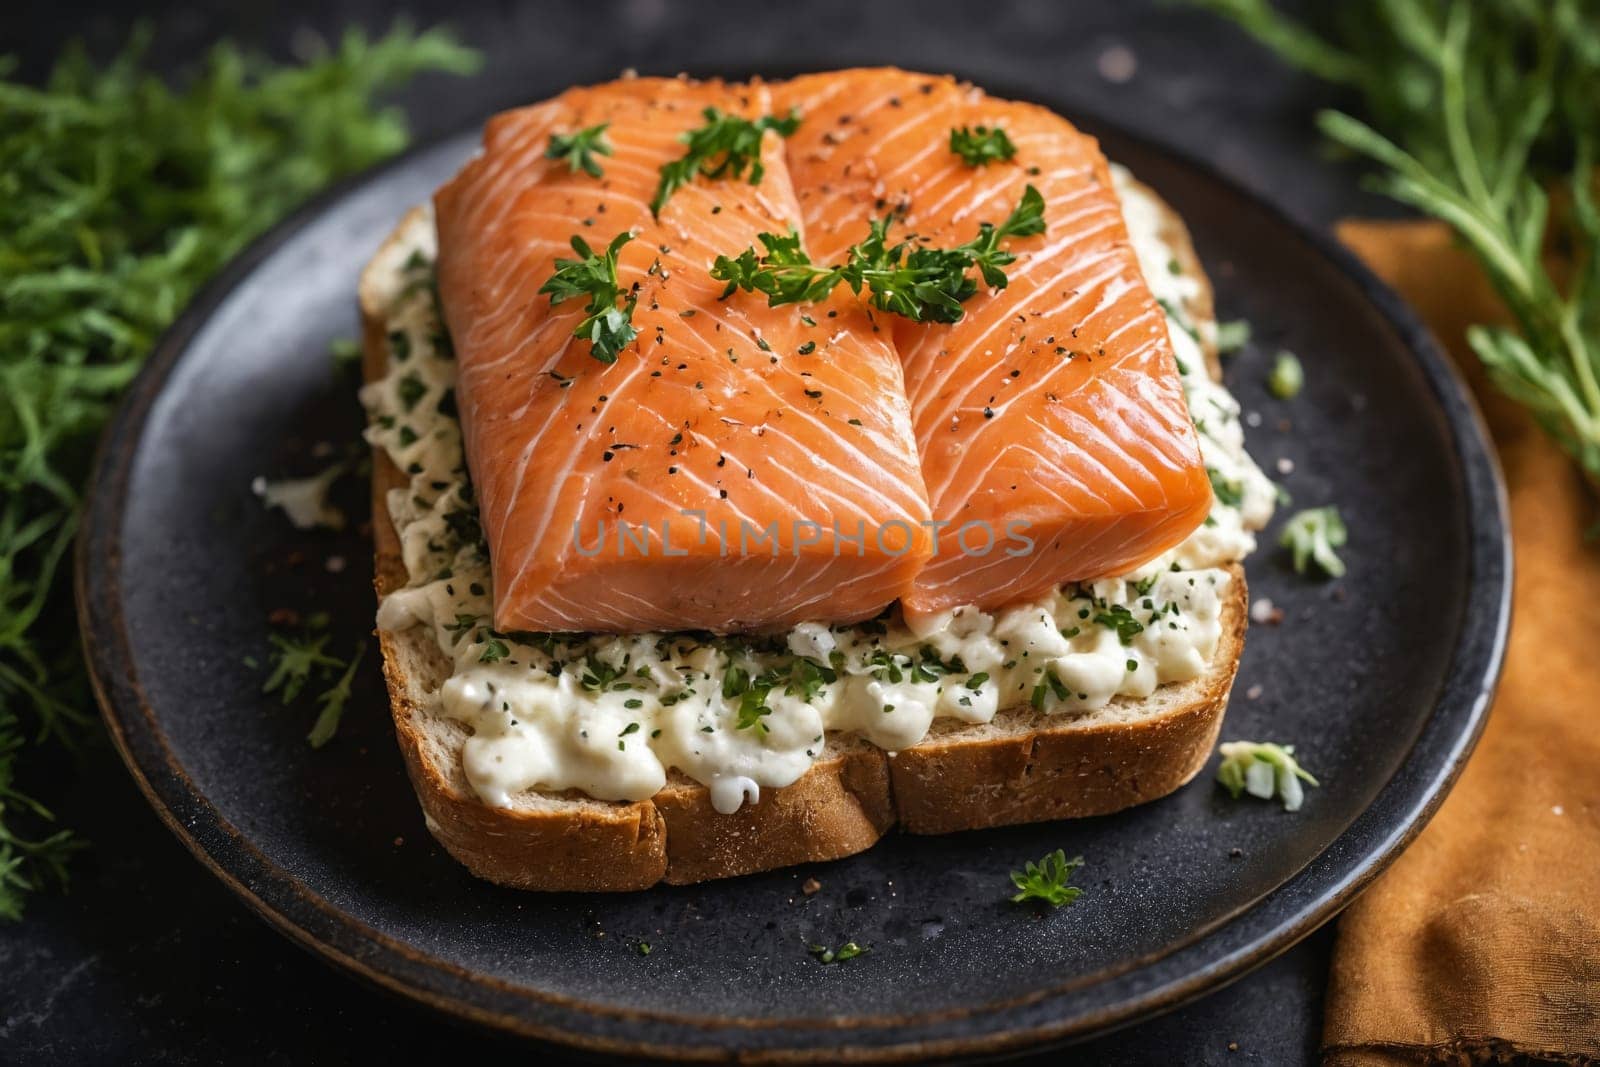 A luxurious bite: smoked salmon and cream cheese on fresh rye with dill and parsley.